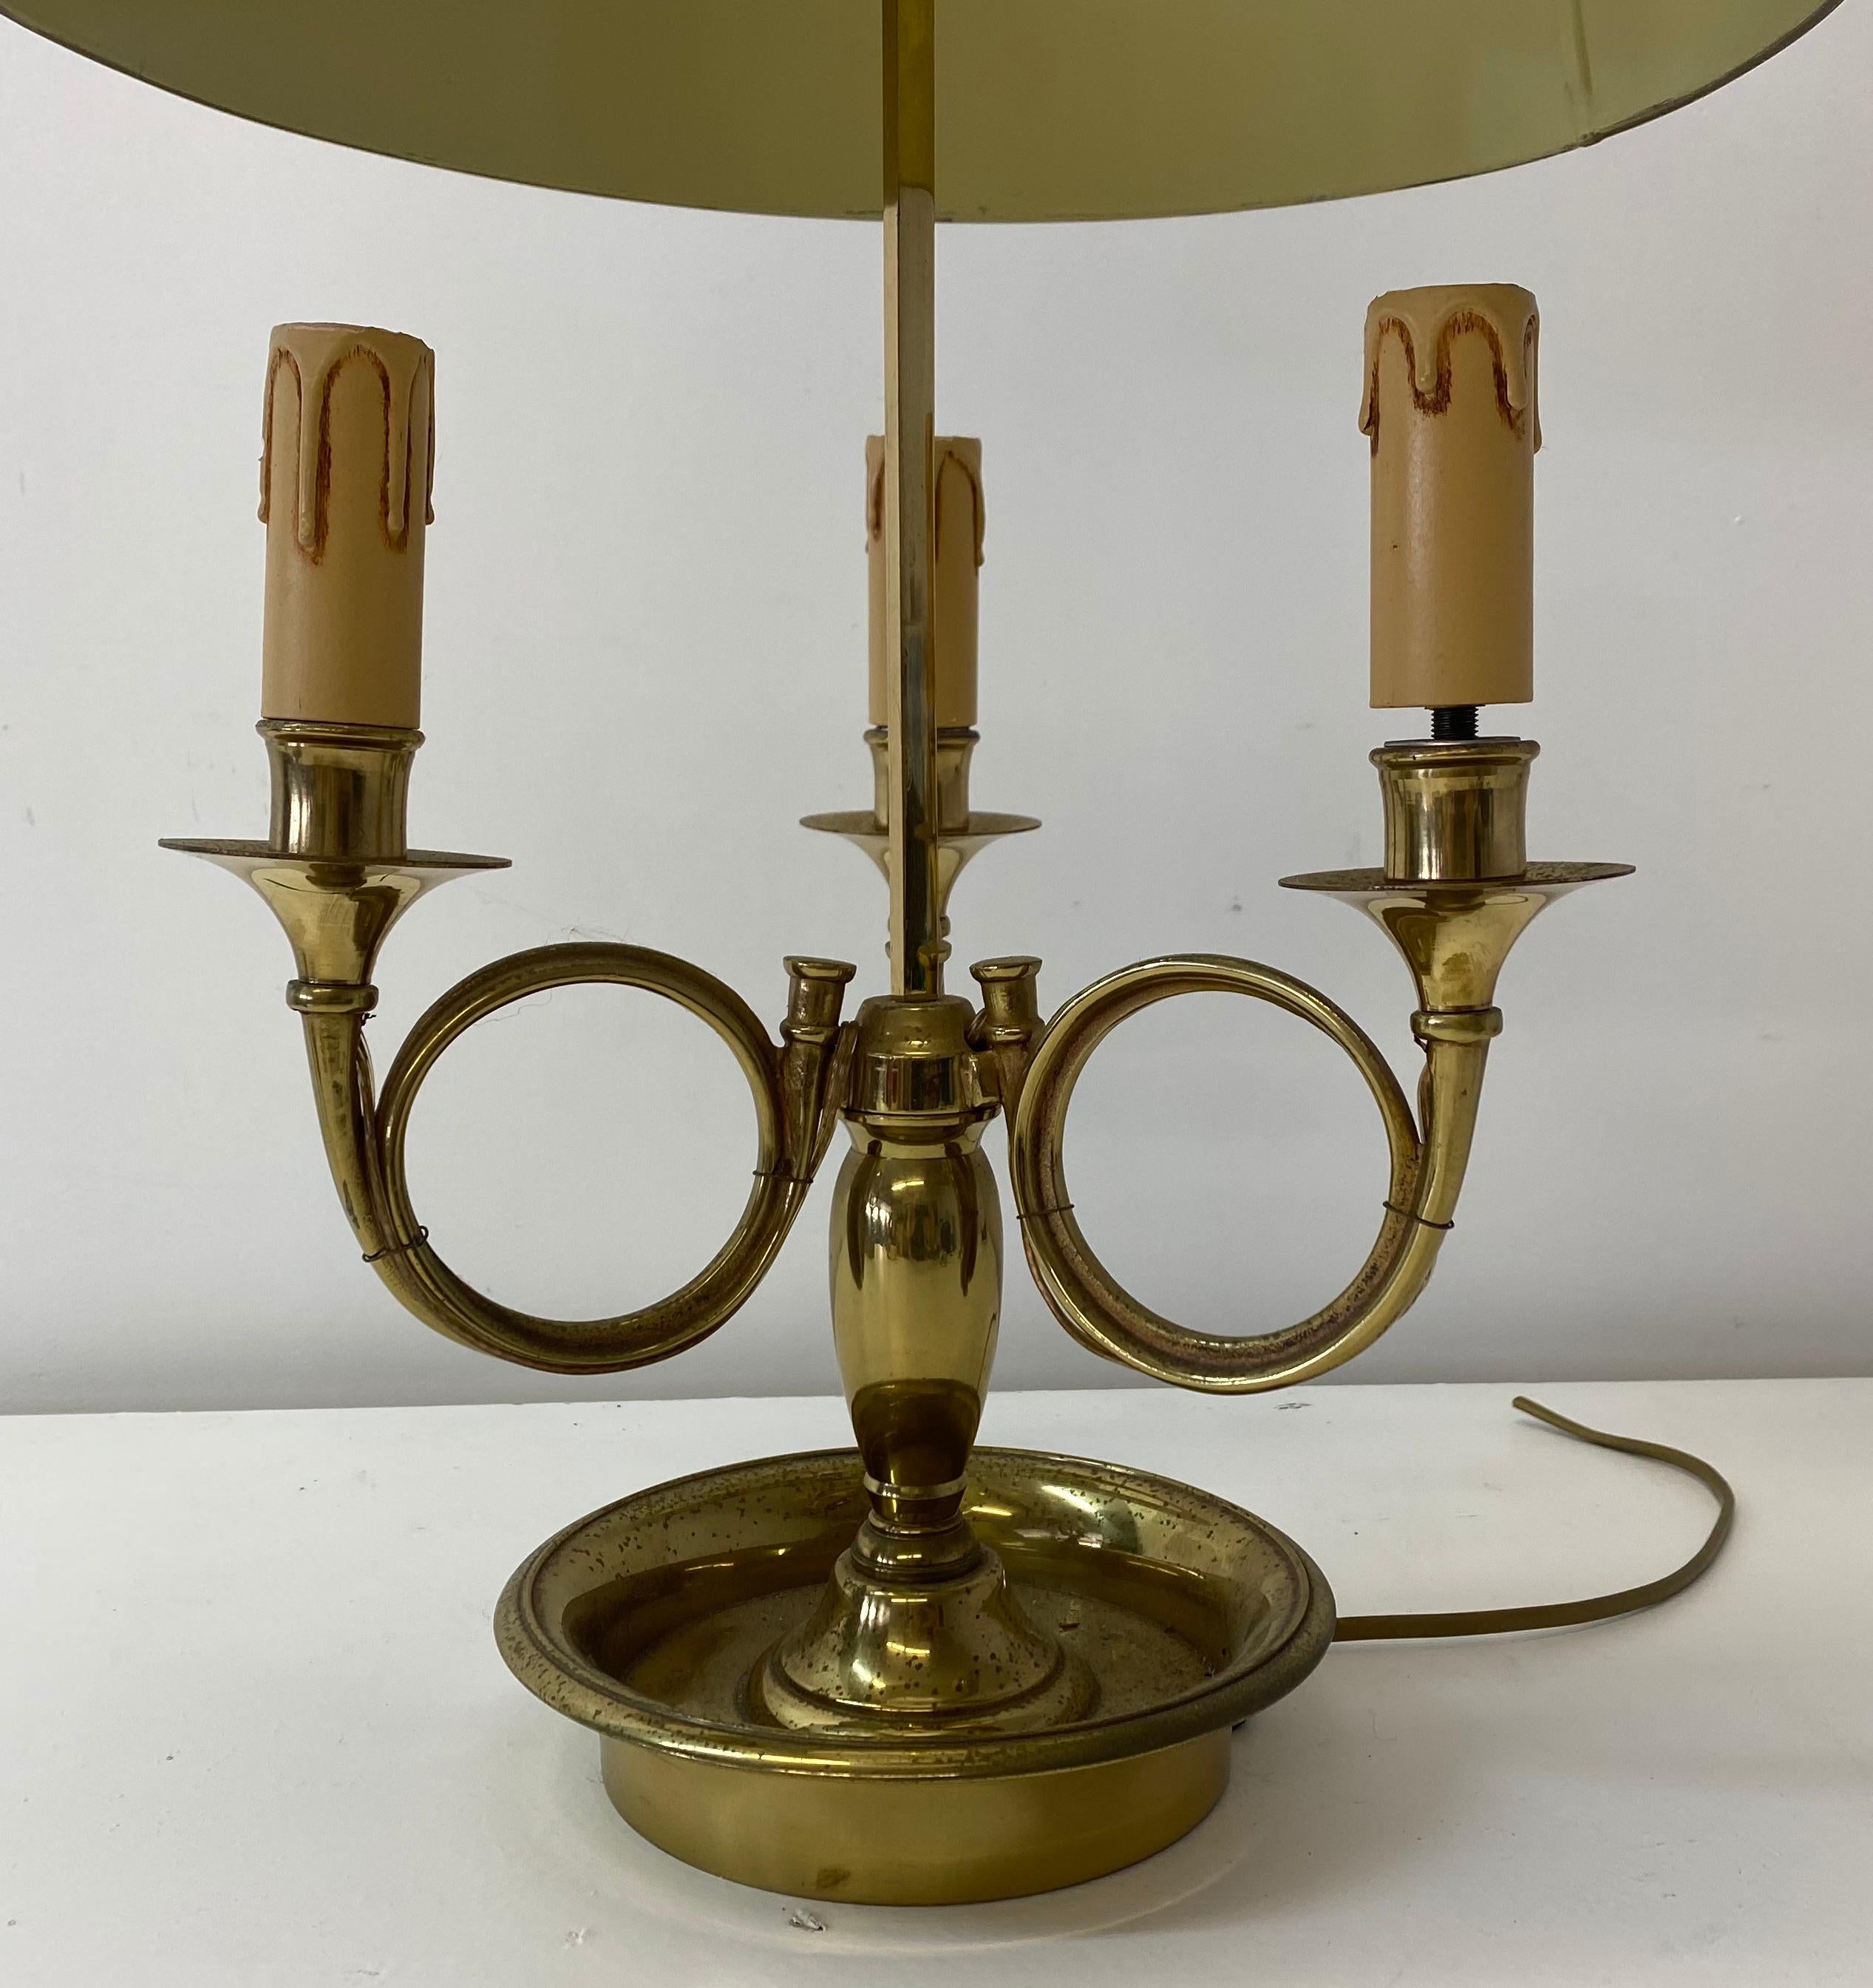 9th century French Bouillotte triple socket table lamp w/ adjusting shade

Outstanding table lamp with adjusting up/down metal shade

Provenance Antonio's Antiques in San Francisco

Measures: 6.75